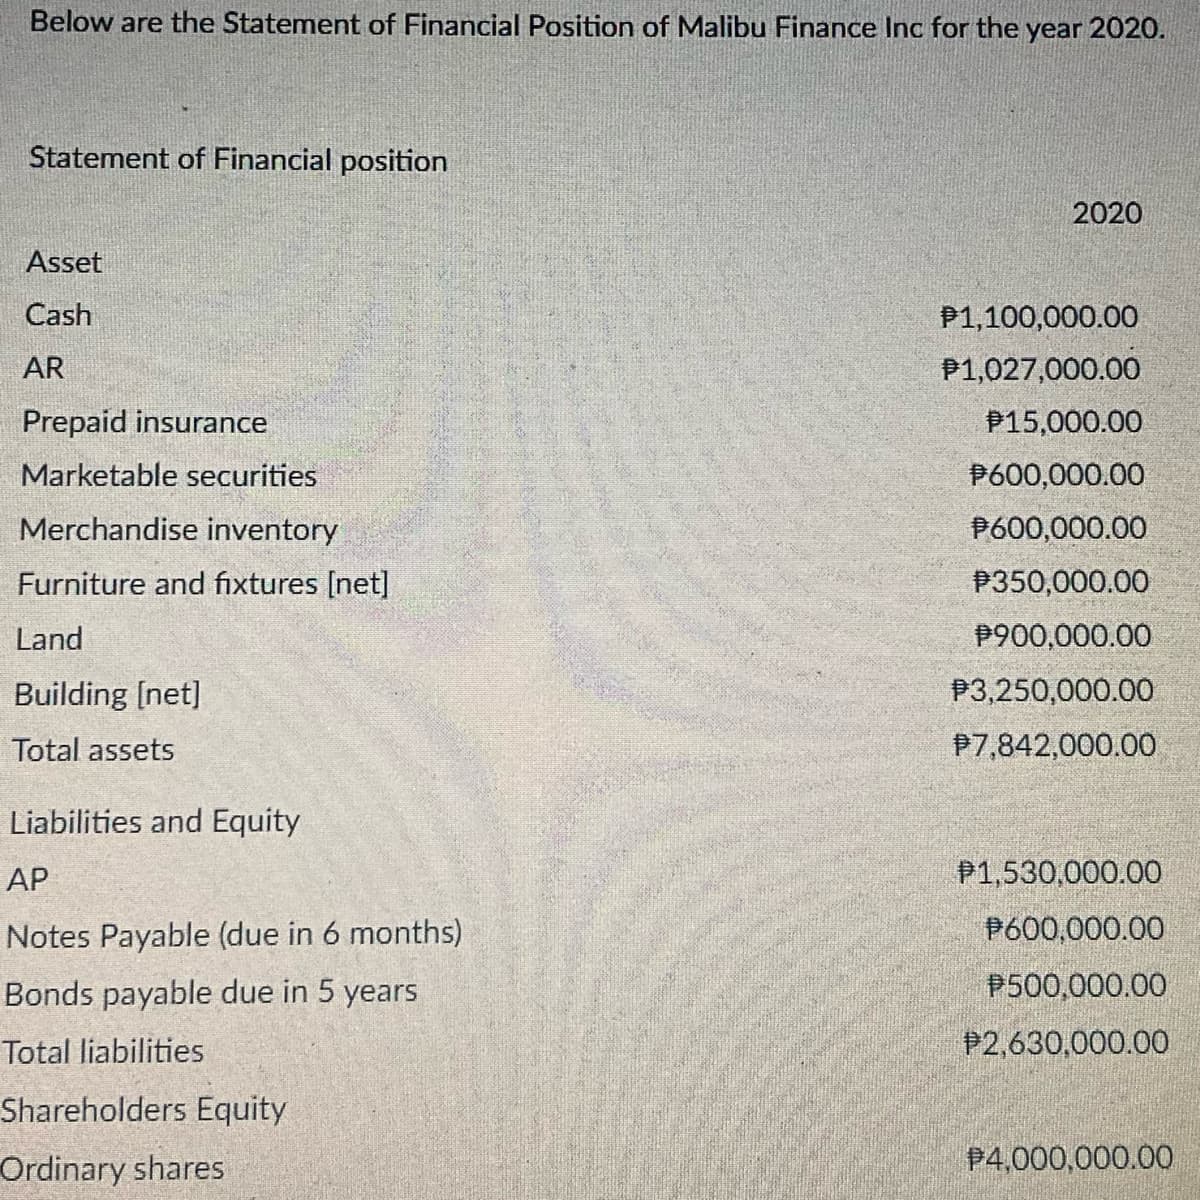 Below are the Statement of Financial Position of Malibu Finance Inc for the year 2020.
Statement of Financial position
2020
Asset
Cash
P1,100,000.00
AR
P1,027,000.00
Prepaid insurance
P15,000.00
Marketable securities
P600,000.00
Merchandise inventory
P600,000.00
Furniture and fixtures [net]
P350,000.00
Land
$900,000.00
Building [net]
$3,250,000.00
Total assets
#7,842,000.00
Liabilities and Equity
AP
P1,530,000.00
Notes Payable (due in 6 months)
P600,000.00
Bonds payable due in 5 years
P500,000.00
Total liabilities
P2,630,000.00
Shareholders Equity
Ordinary shares
$4,000,000.00